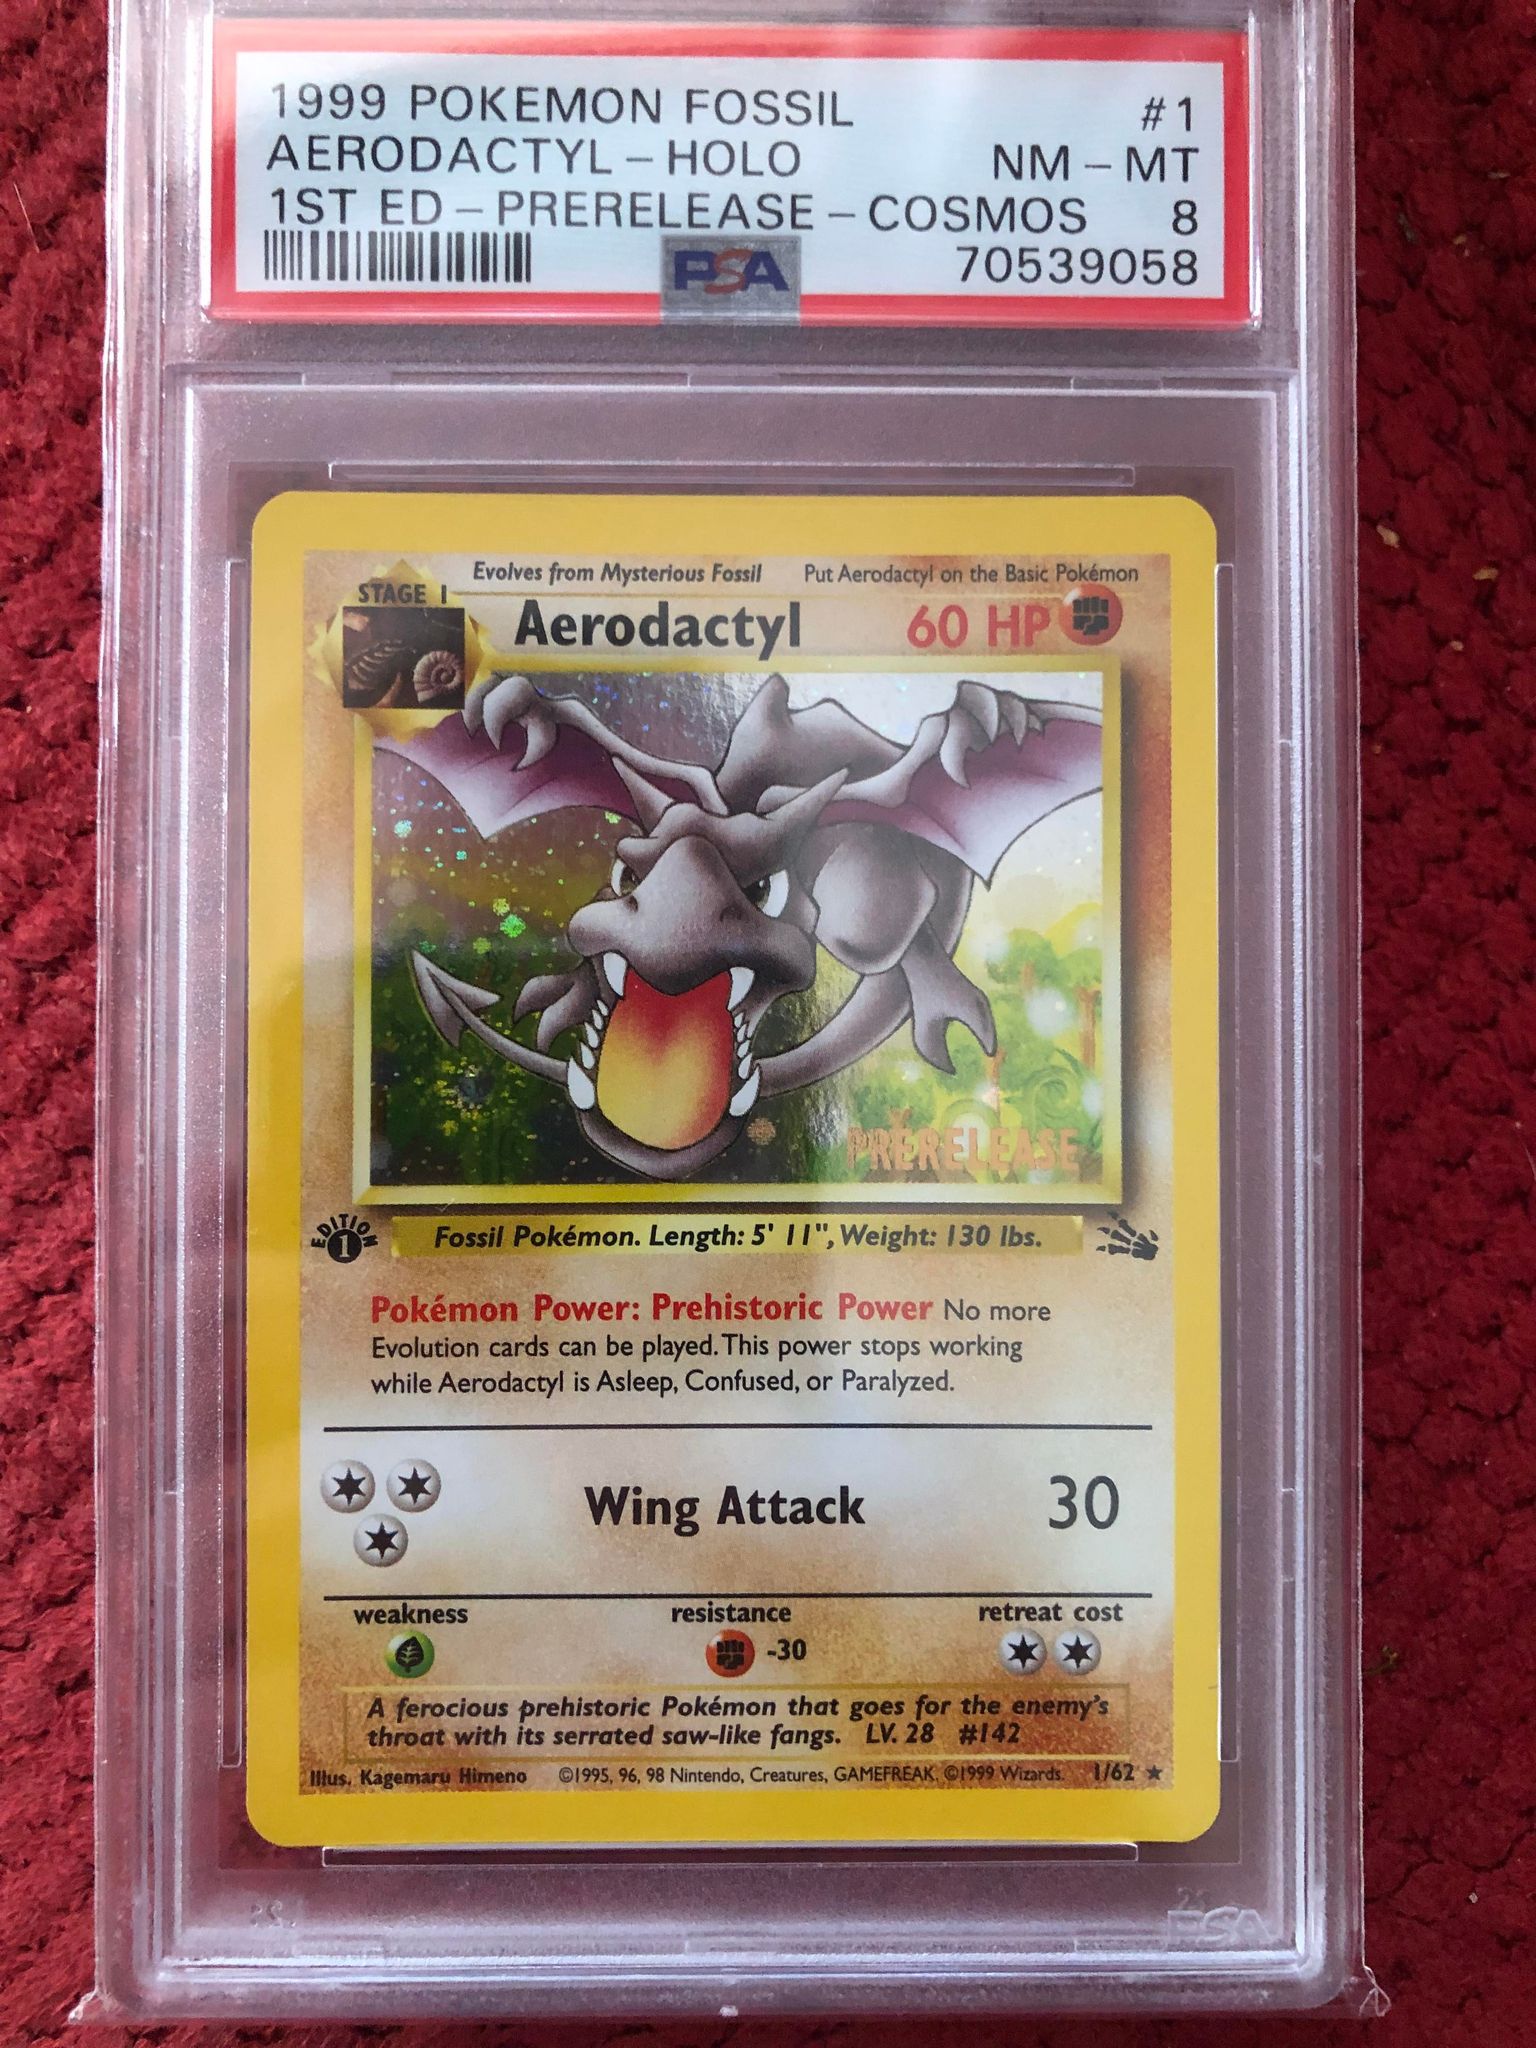 1st Edition Fossil Aerodactyl HOLO Pre Release COSMOS - PSA 8 (low pop)